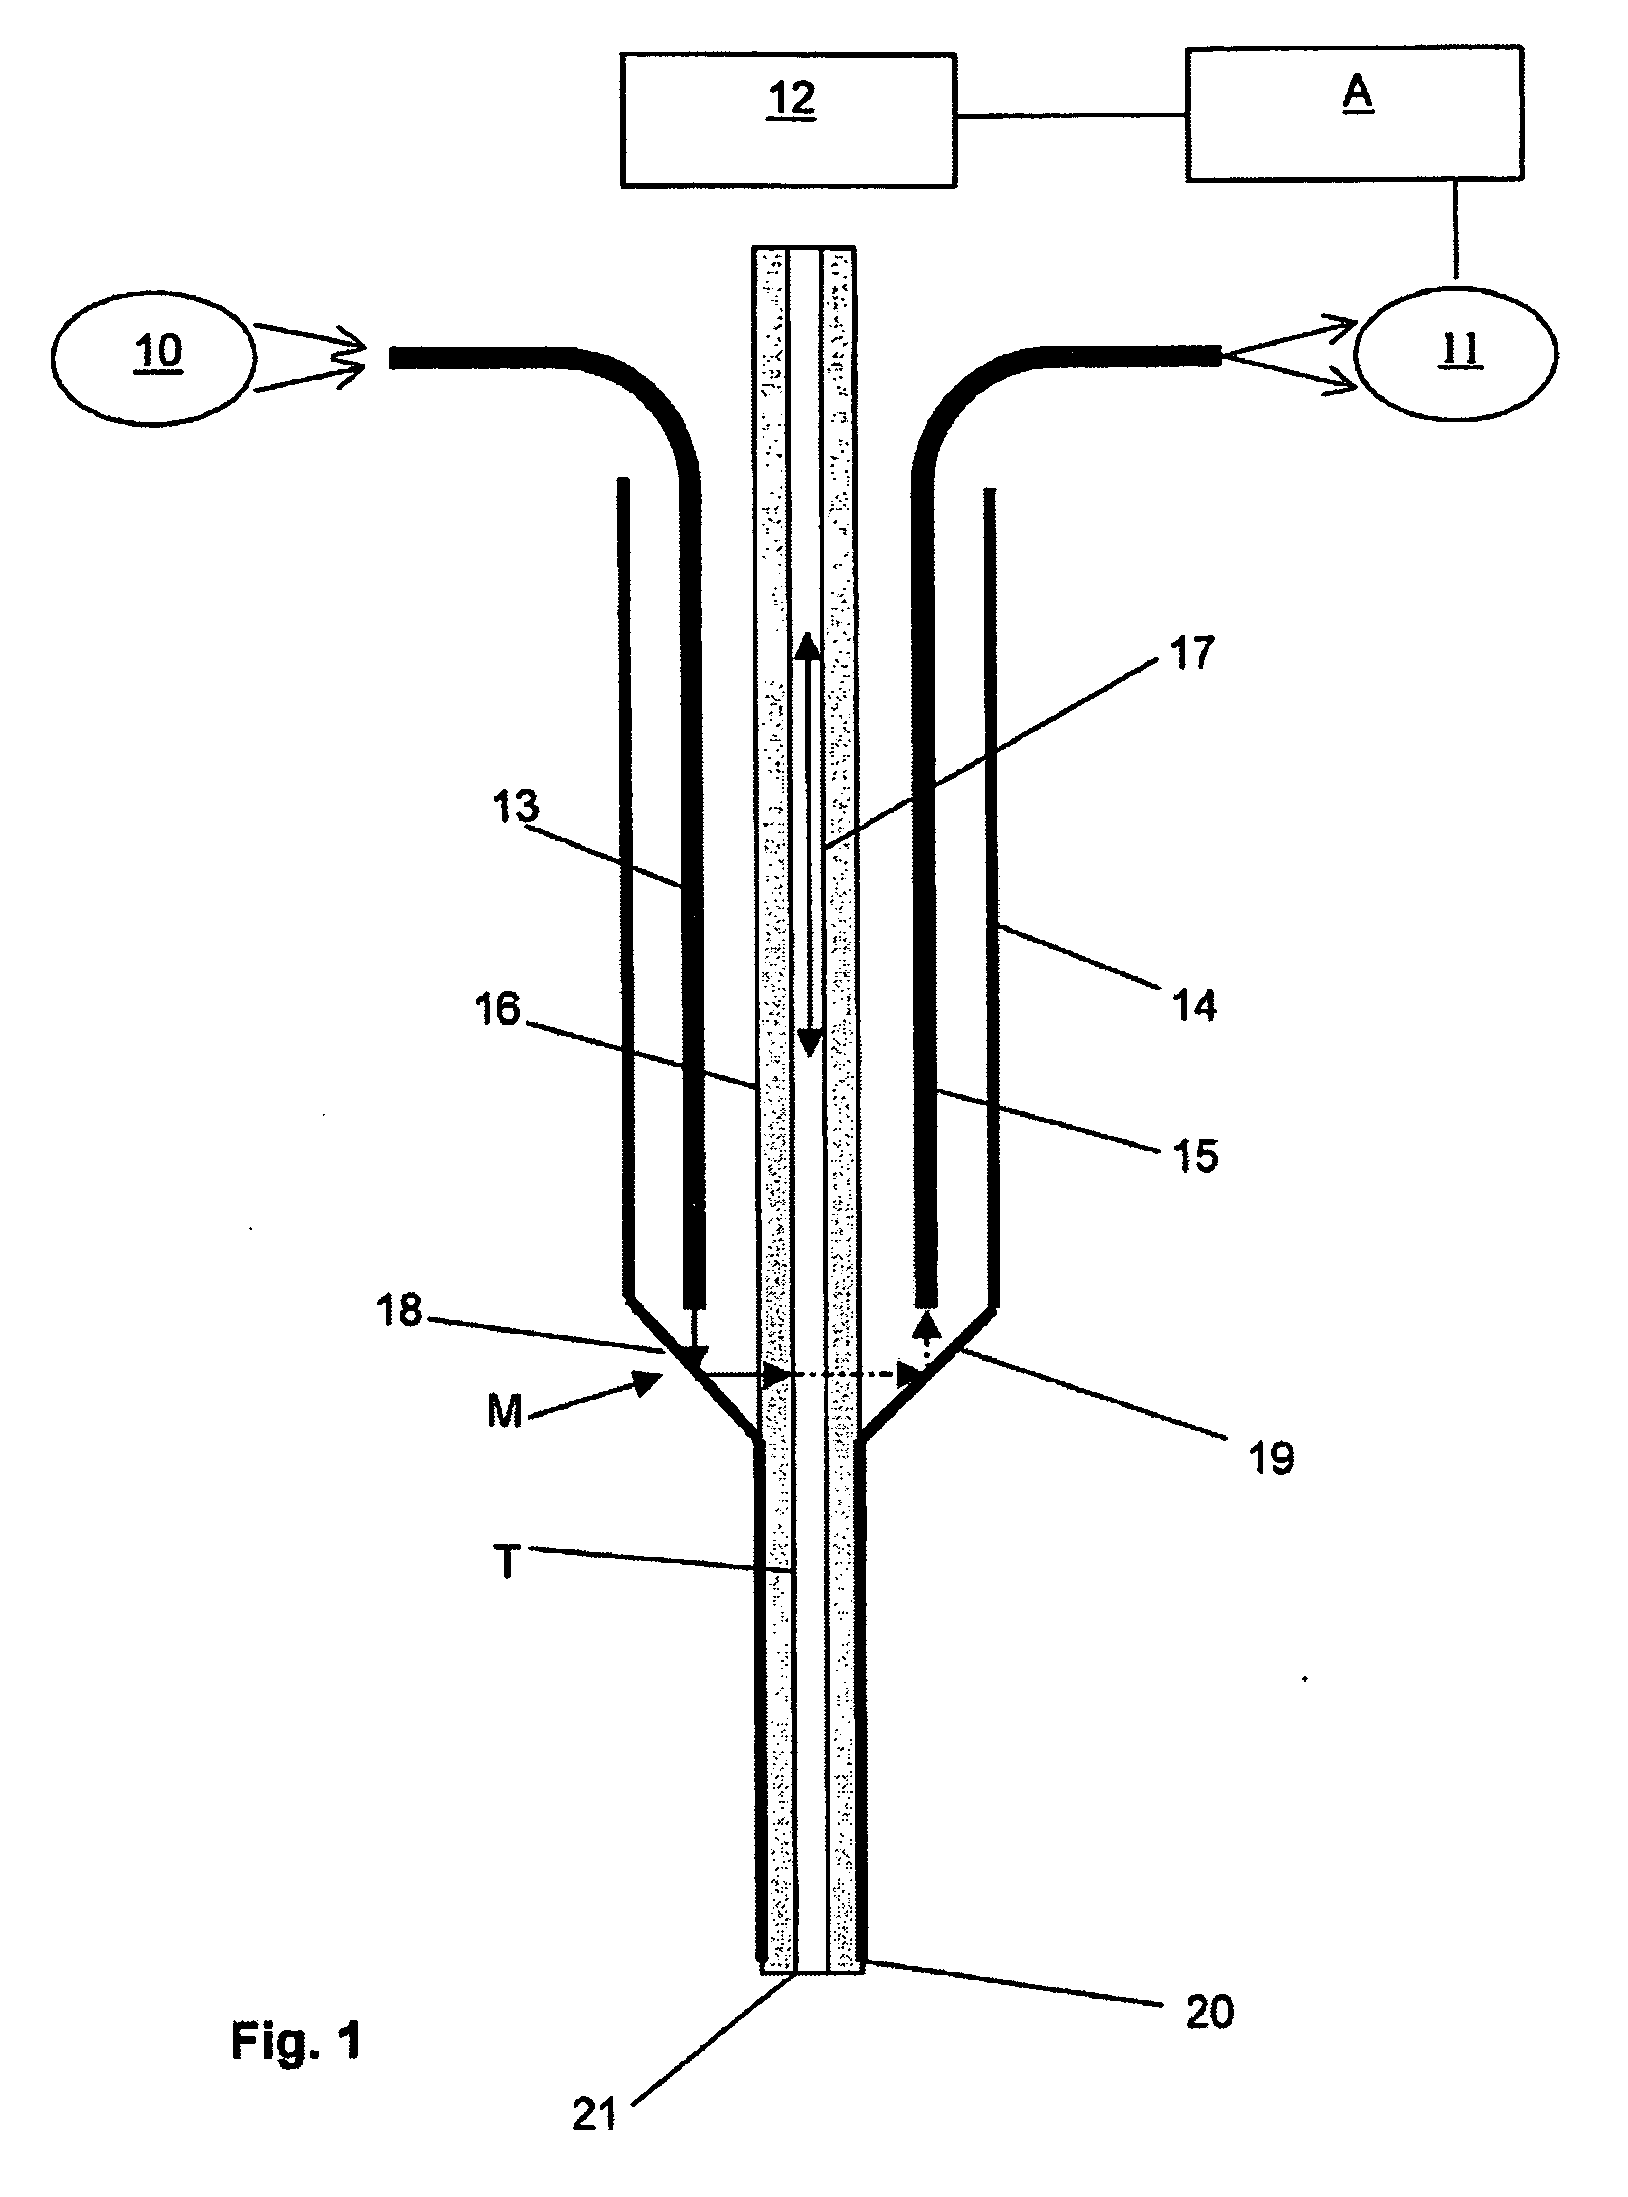 Method and apparatus for optical detection of a phase transition